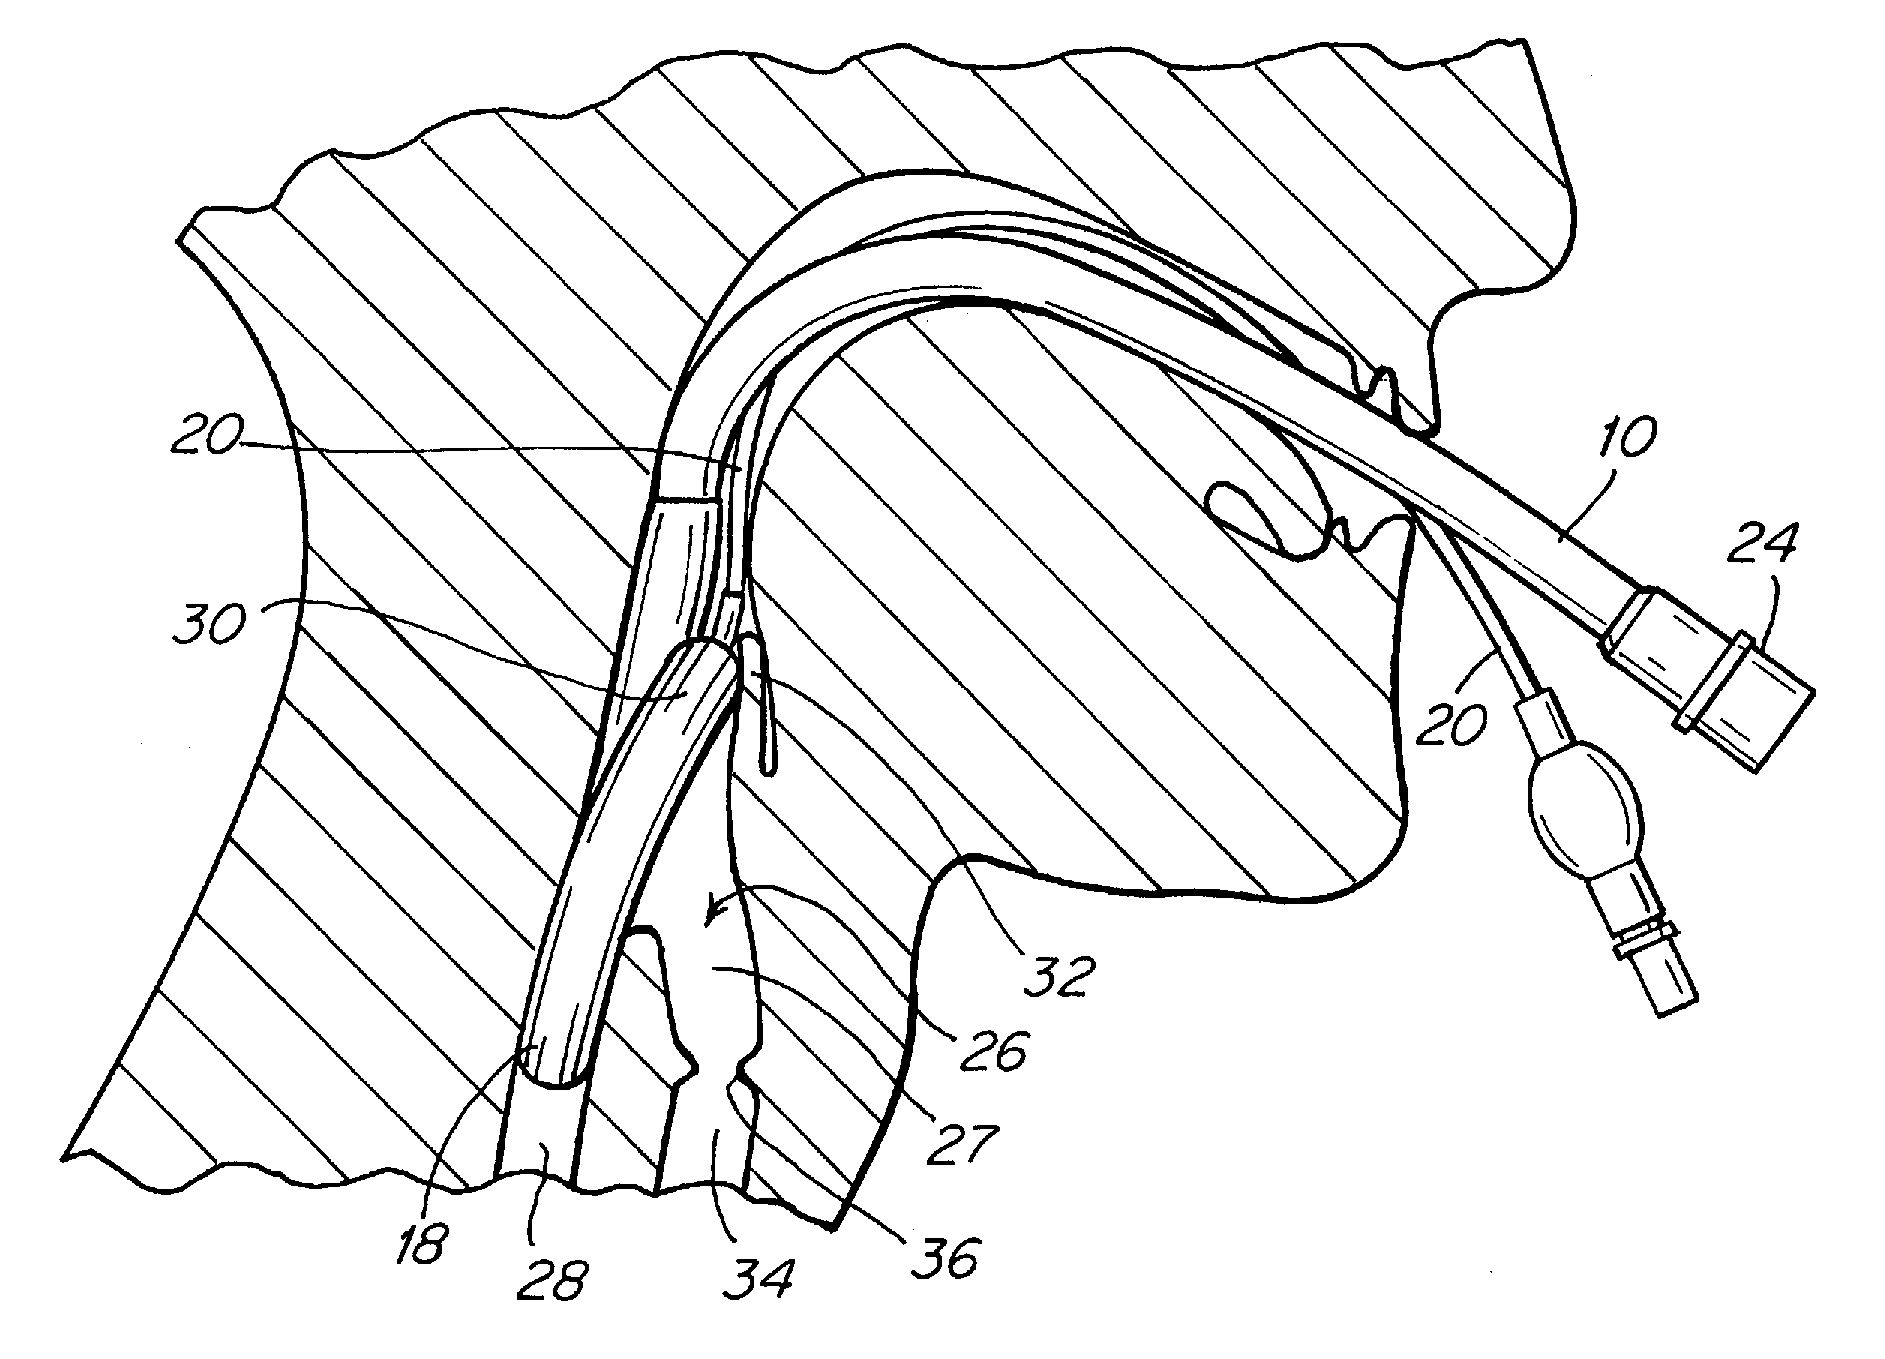 Laryngeal mask airway placement system and method